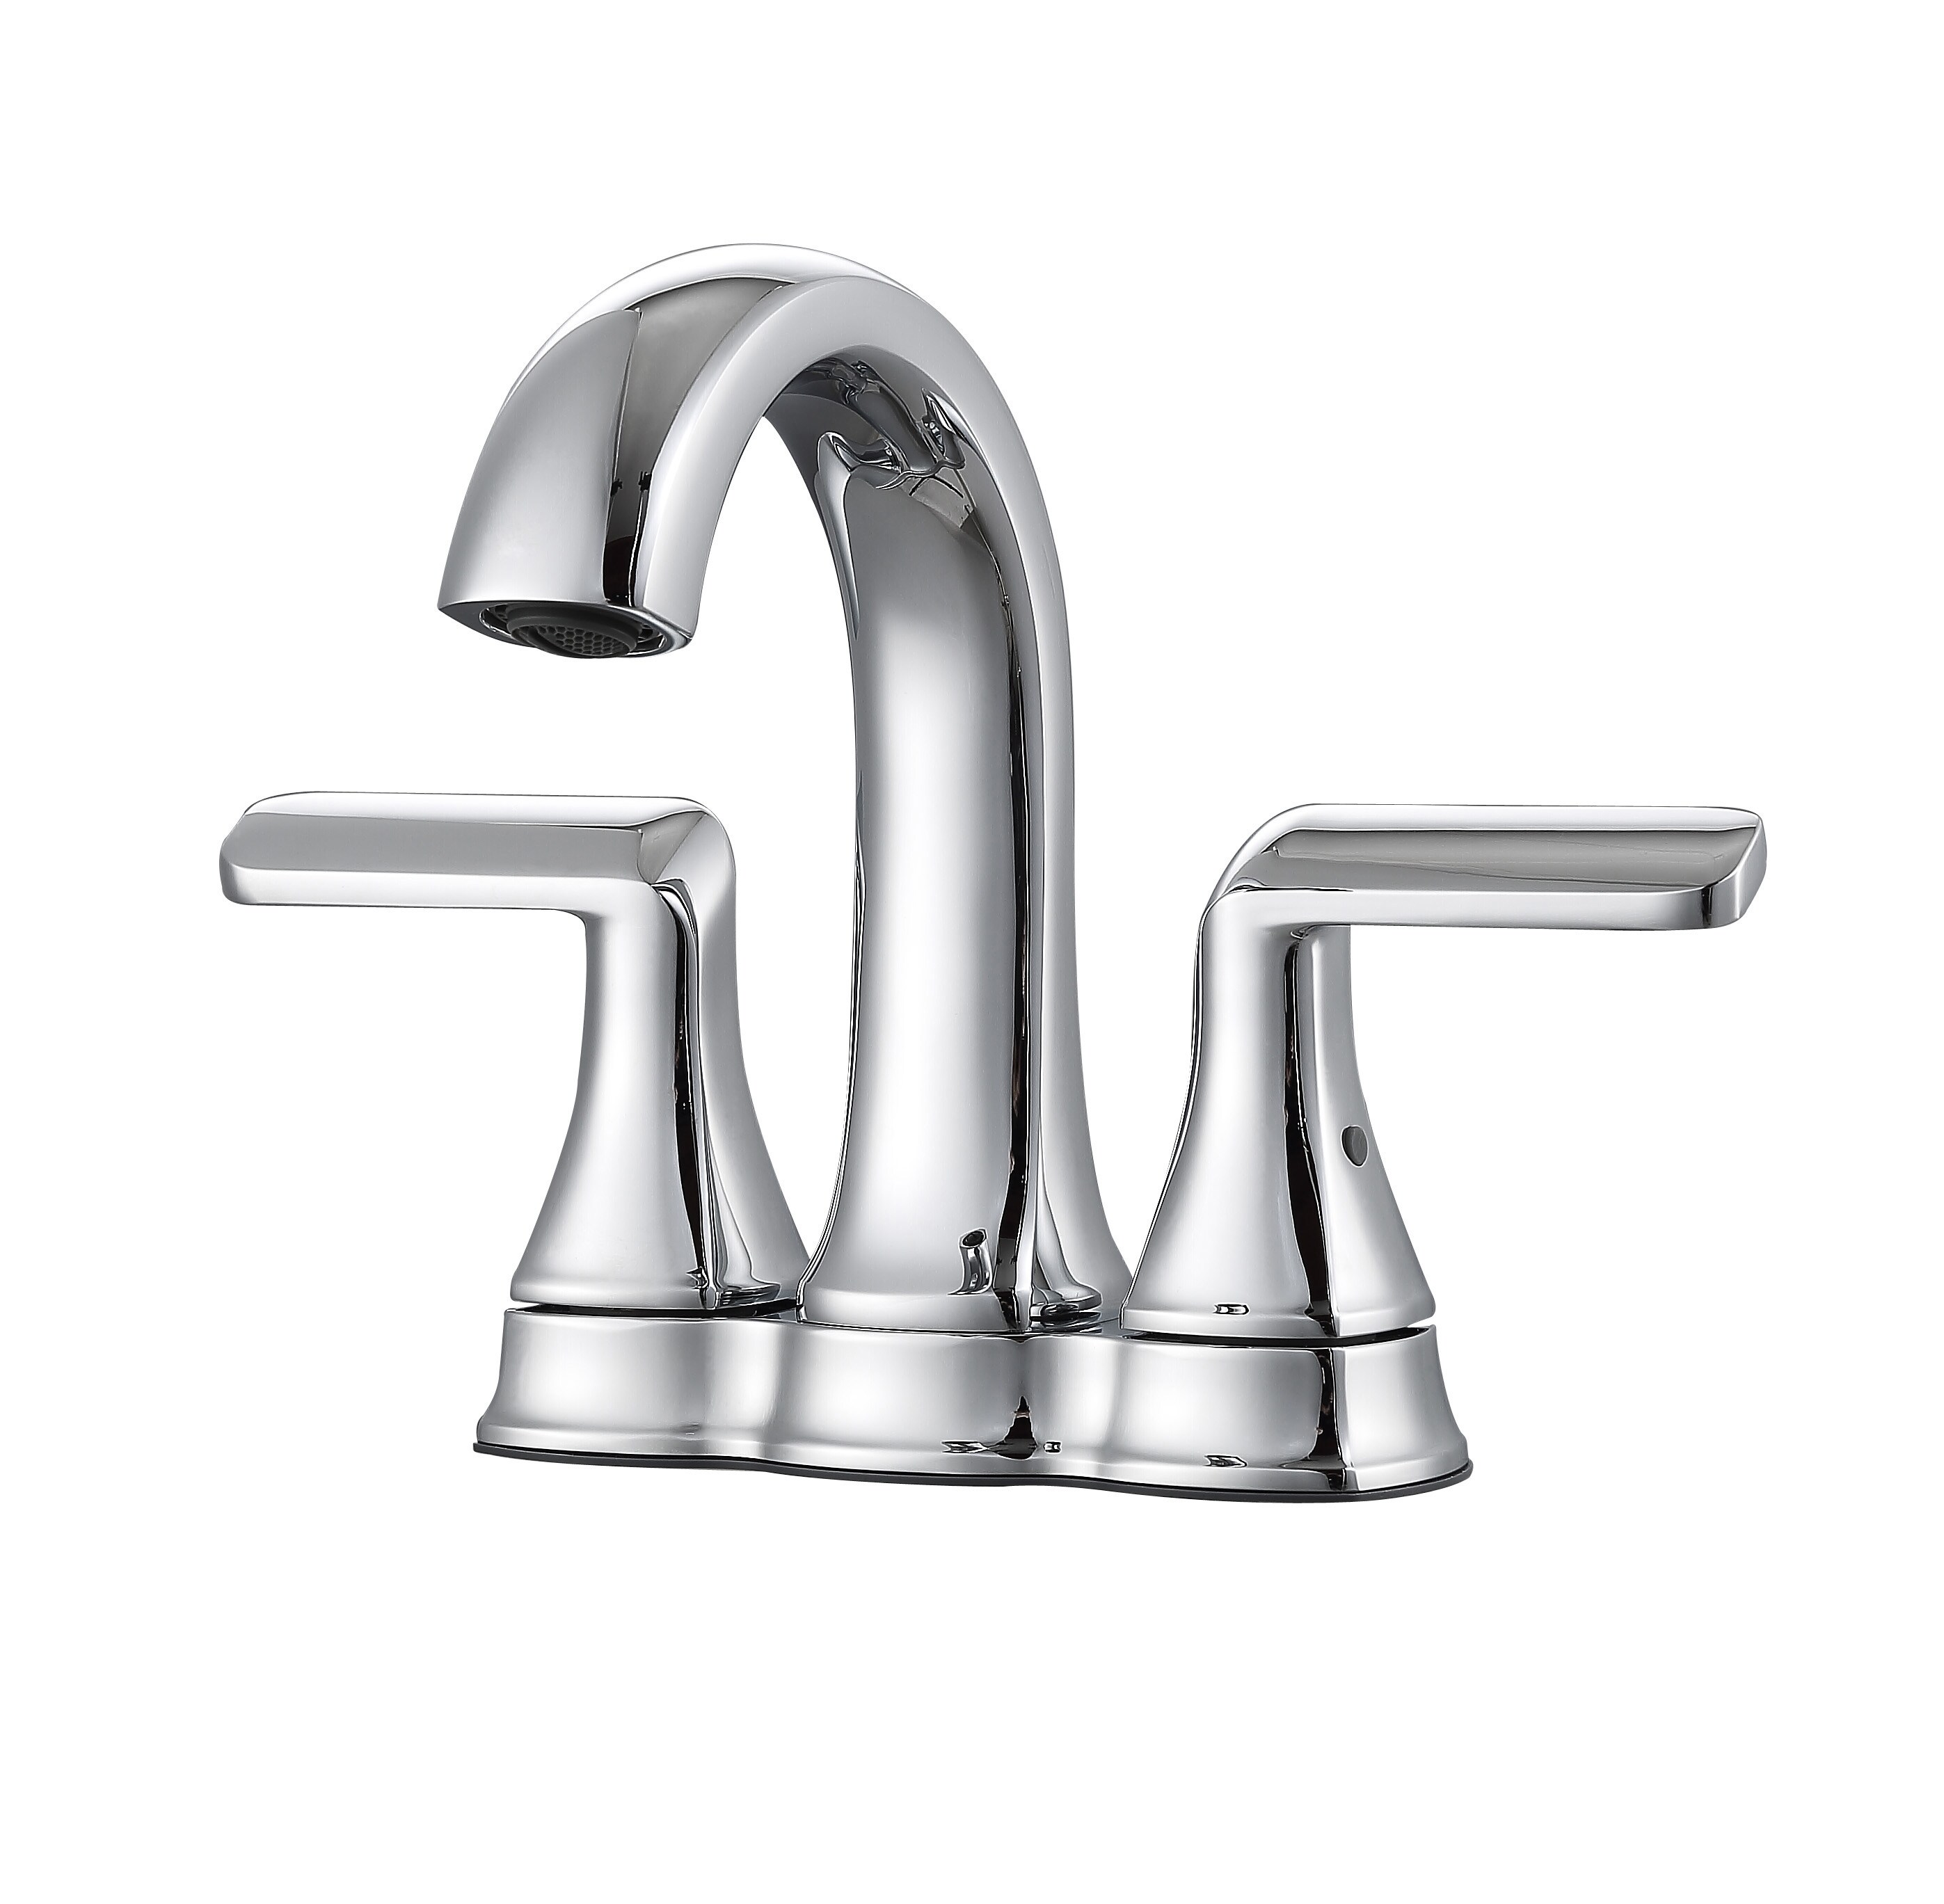 Ancona Arezzo Chrome 2-Handle 4-in Centerset Bathroom Sink Bathroom Sink Faucets department at Lowes.com